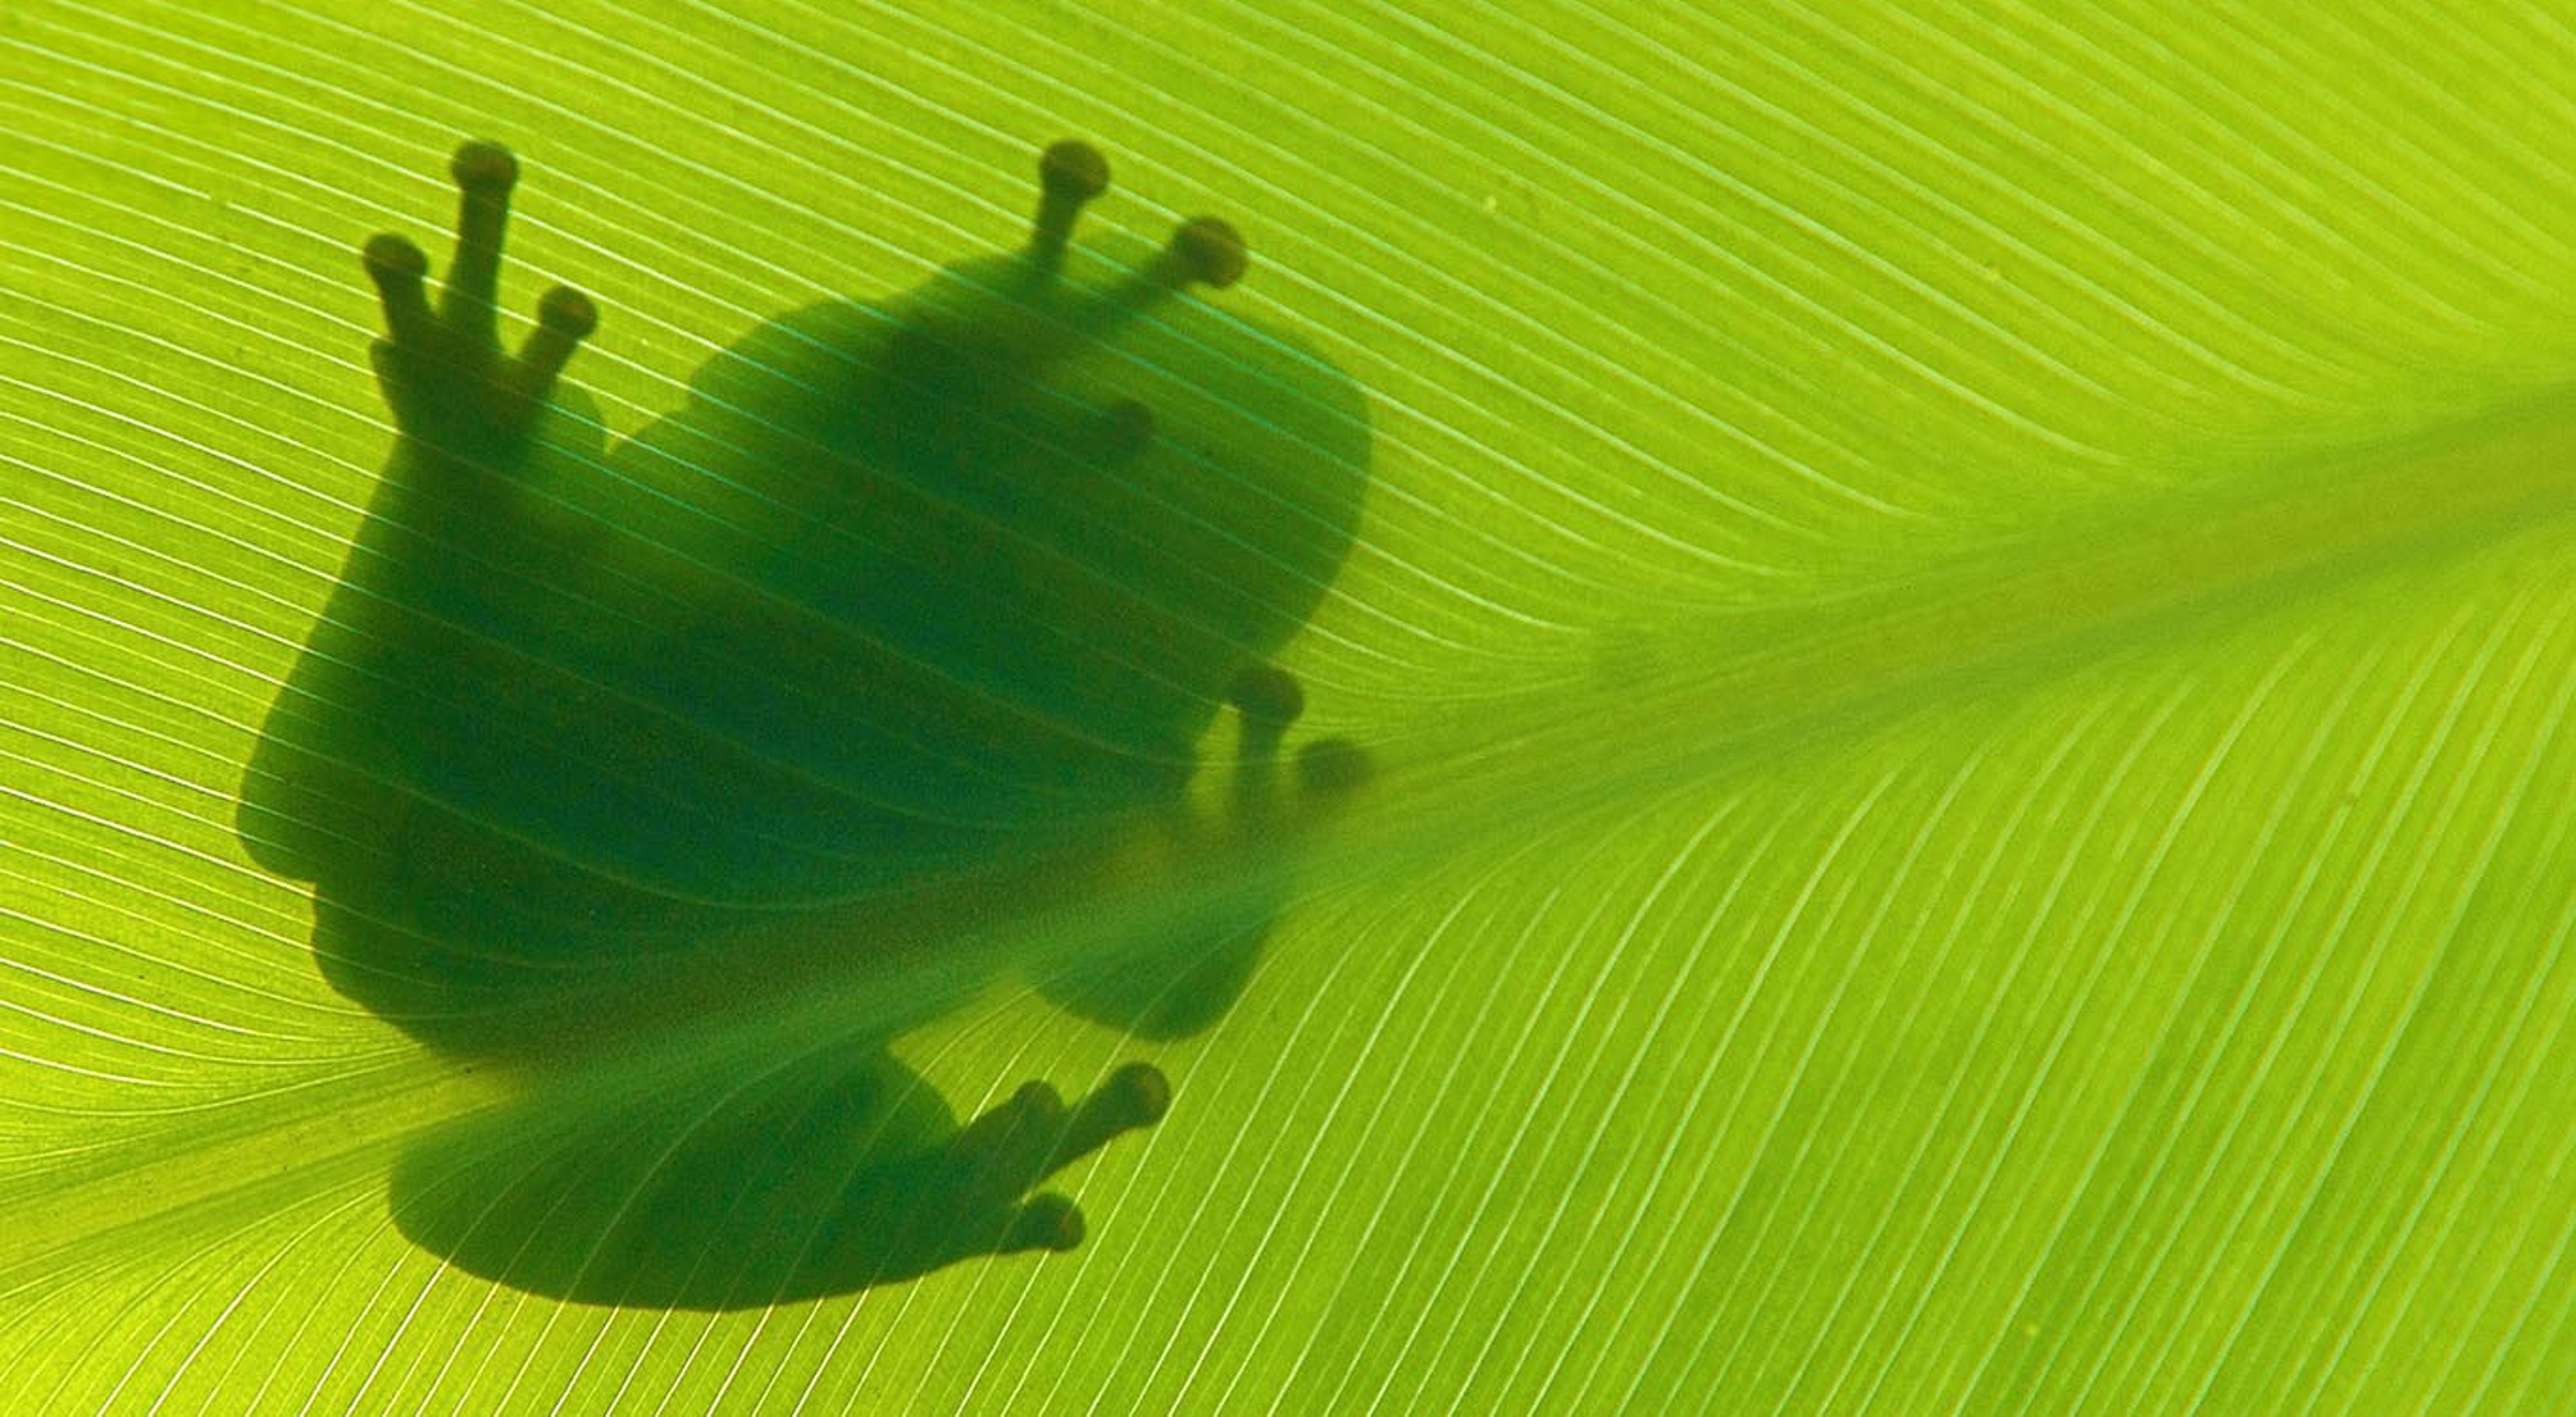 Silhouette of a green tree frog sitting on top of a leaf.